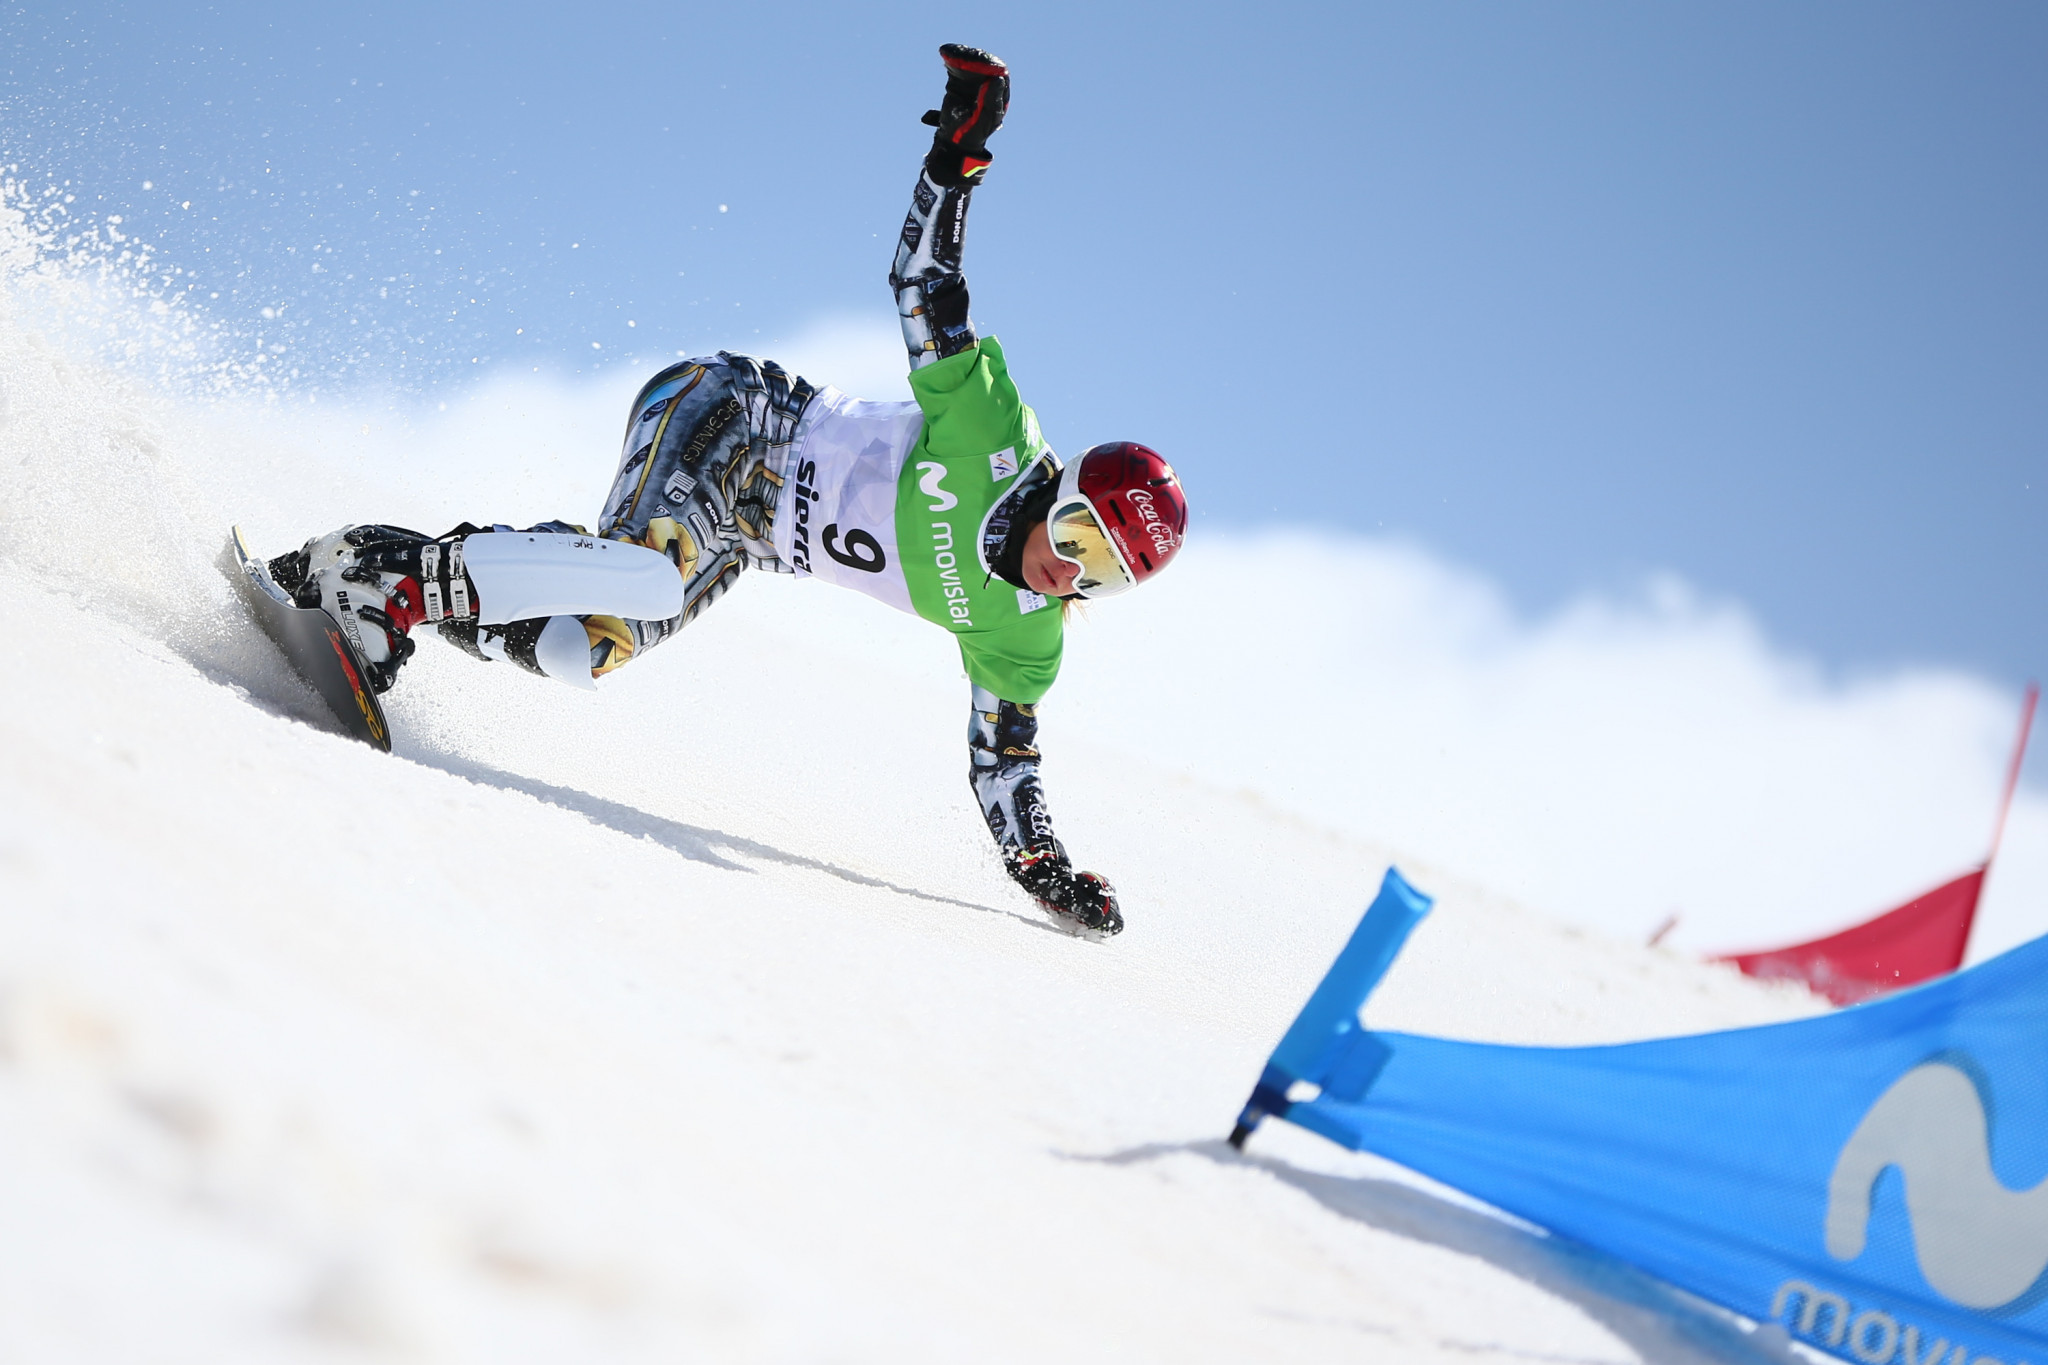 Snowboard World Cup in Bankso allows final warm-up for Pyeongchang 